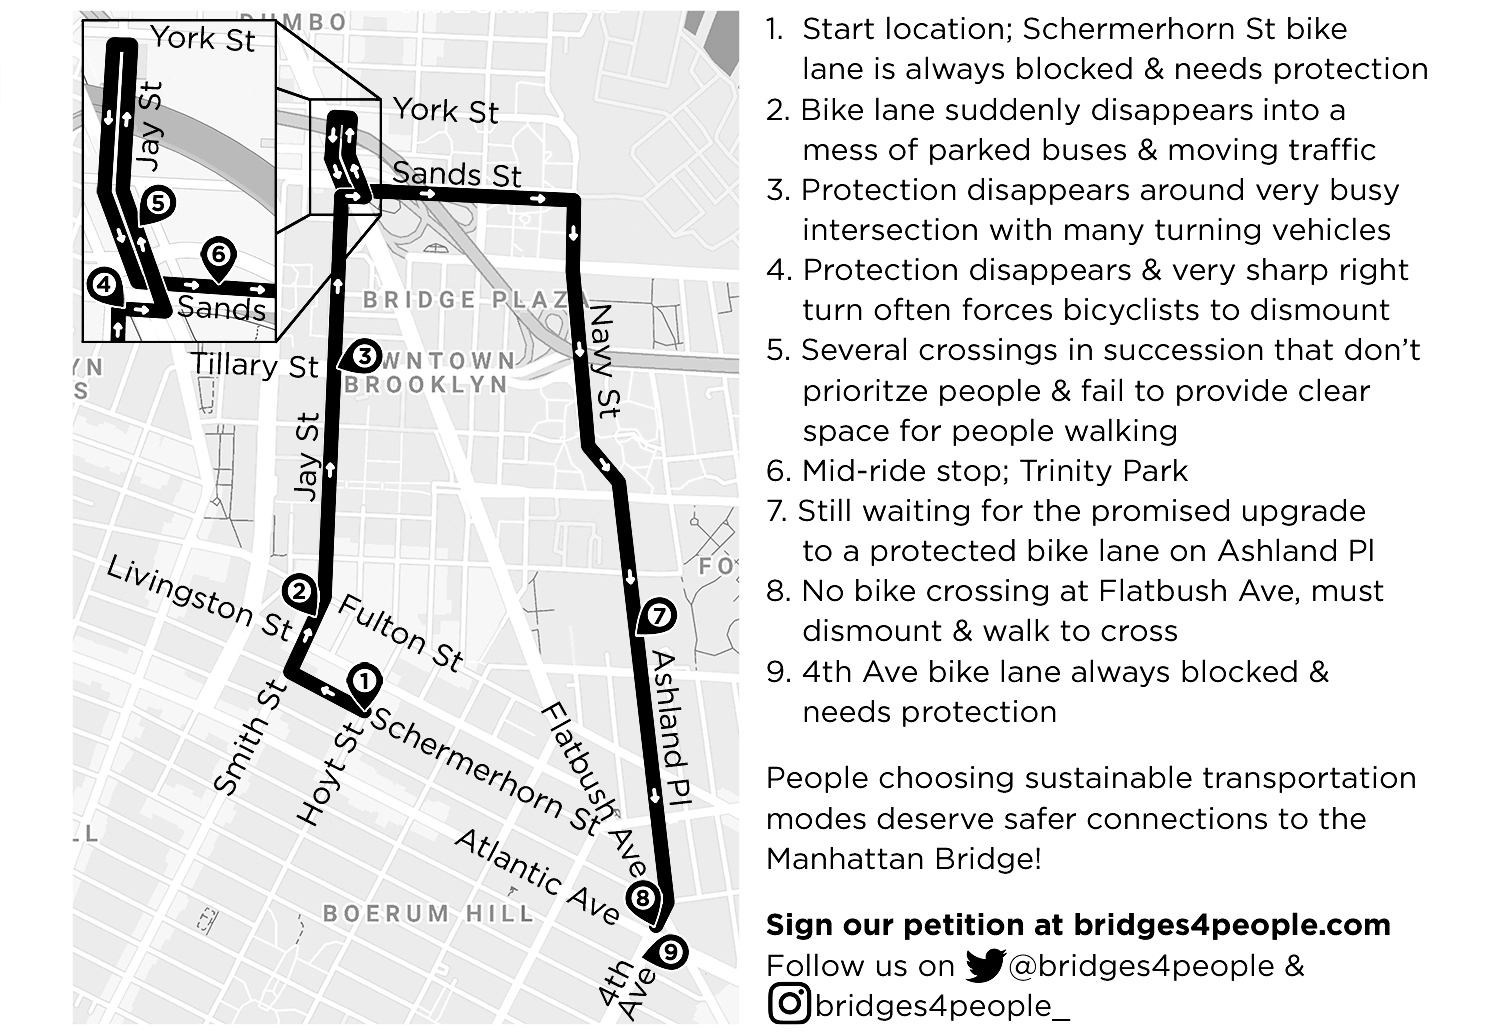 Map of ride route along Schermerhorn St, Smith St, Jay St, Sands St, Navy St, and Ashland Pl. Issues for pedestrians and bicyclists are highlighted along the way:
1. Schermerhorn St bike lane is always blocked & needs protection
2. The Smith/Jay St bike lane completely disappears between Livingston and Fulton Sts into a mess of parked buses & moving traffic
3. Bike lane protection disappears around the busy and wide Tillary & Jay Sts intersection
4. As the Jay St bike lane turns at Sands St, protection disappears and there is a very sharp right turn that often forces bicyclists to dismount
5. Under the Manhattan Bridge at Sands & Jay Sts, there are several crossings in succession that don't prioritize people without clear space for people walking
6. Trinity Park could be a beautiful park
7. Ashland Pl was promised a protected bike lane but has yet to be create
8. No bike crossing across Flatbush Ave at Ashland Pl/4th Ave
9. 4th Ave bike lane always blocked & needs protection